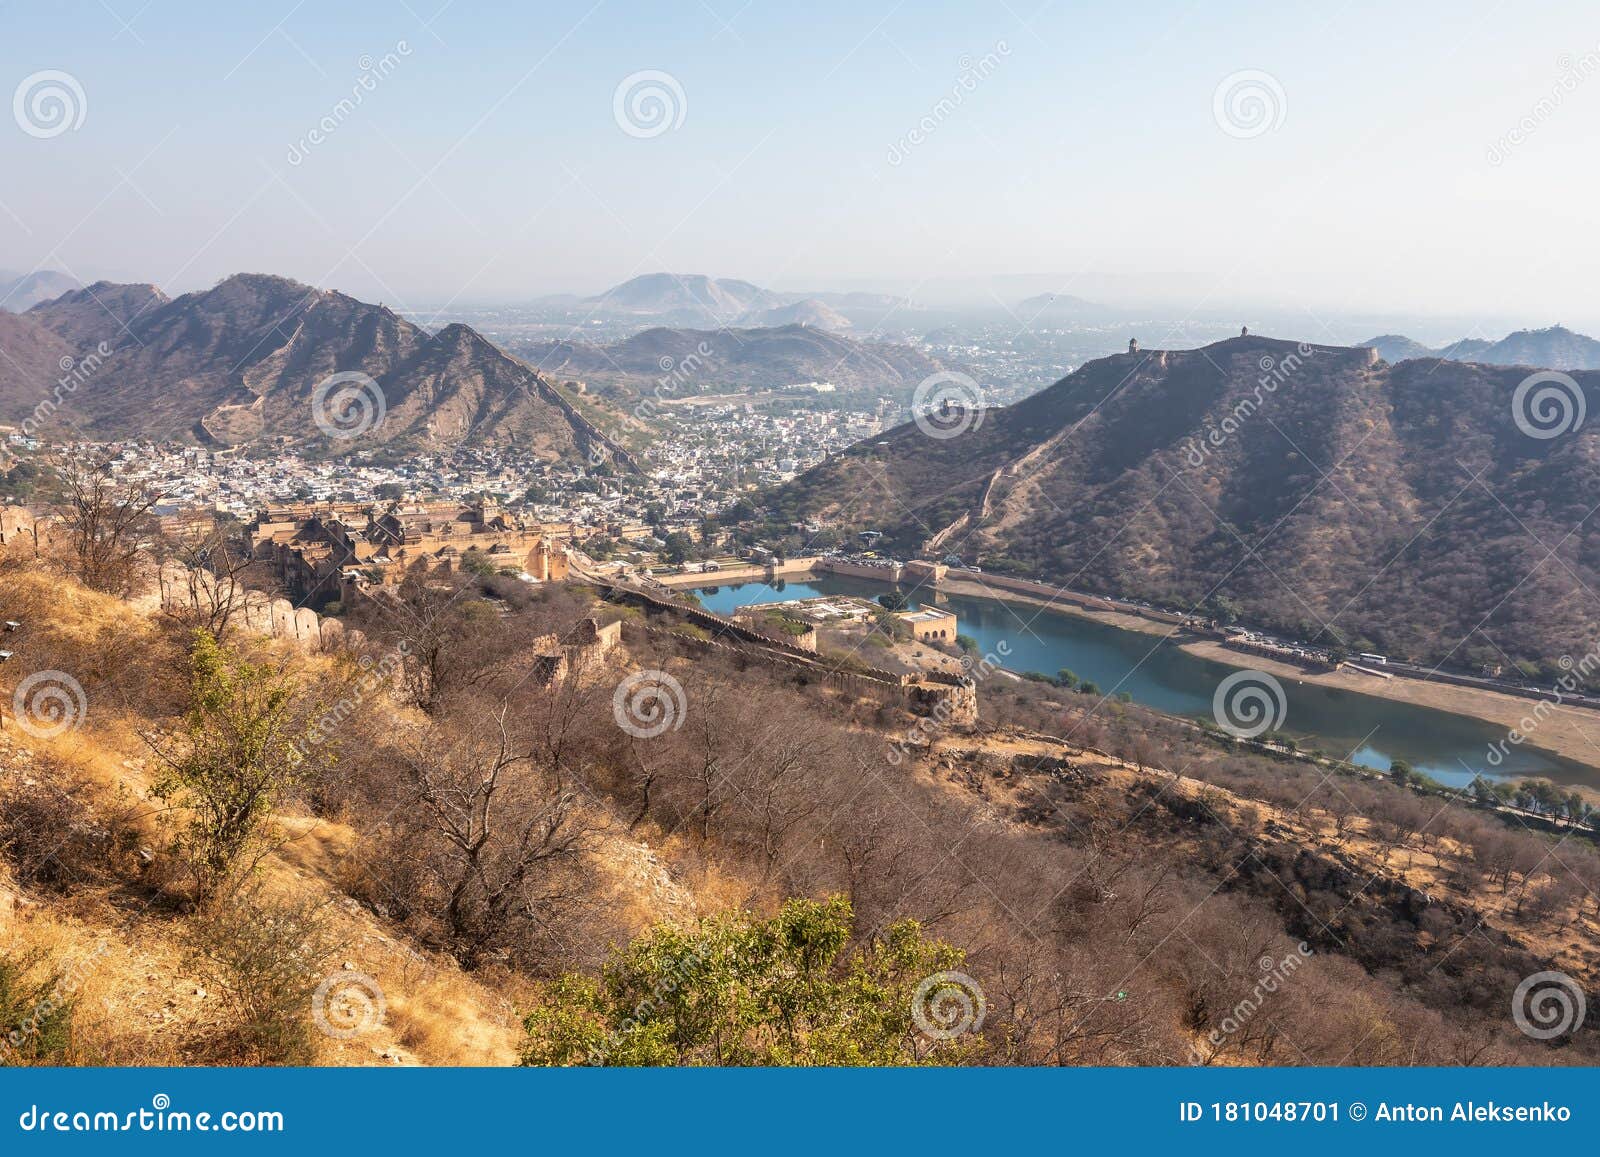 nature and forts of jaipur hills, panorama of india